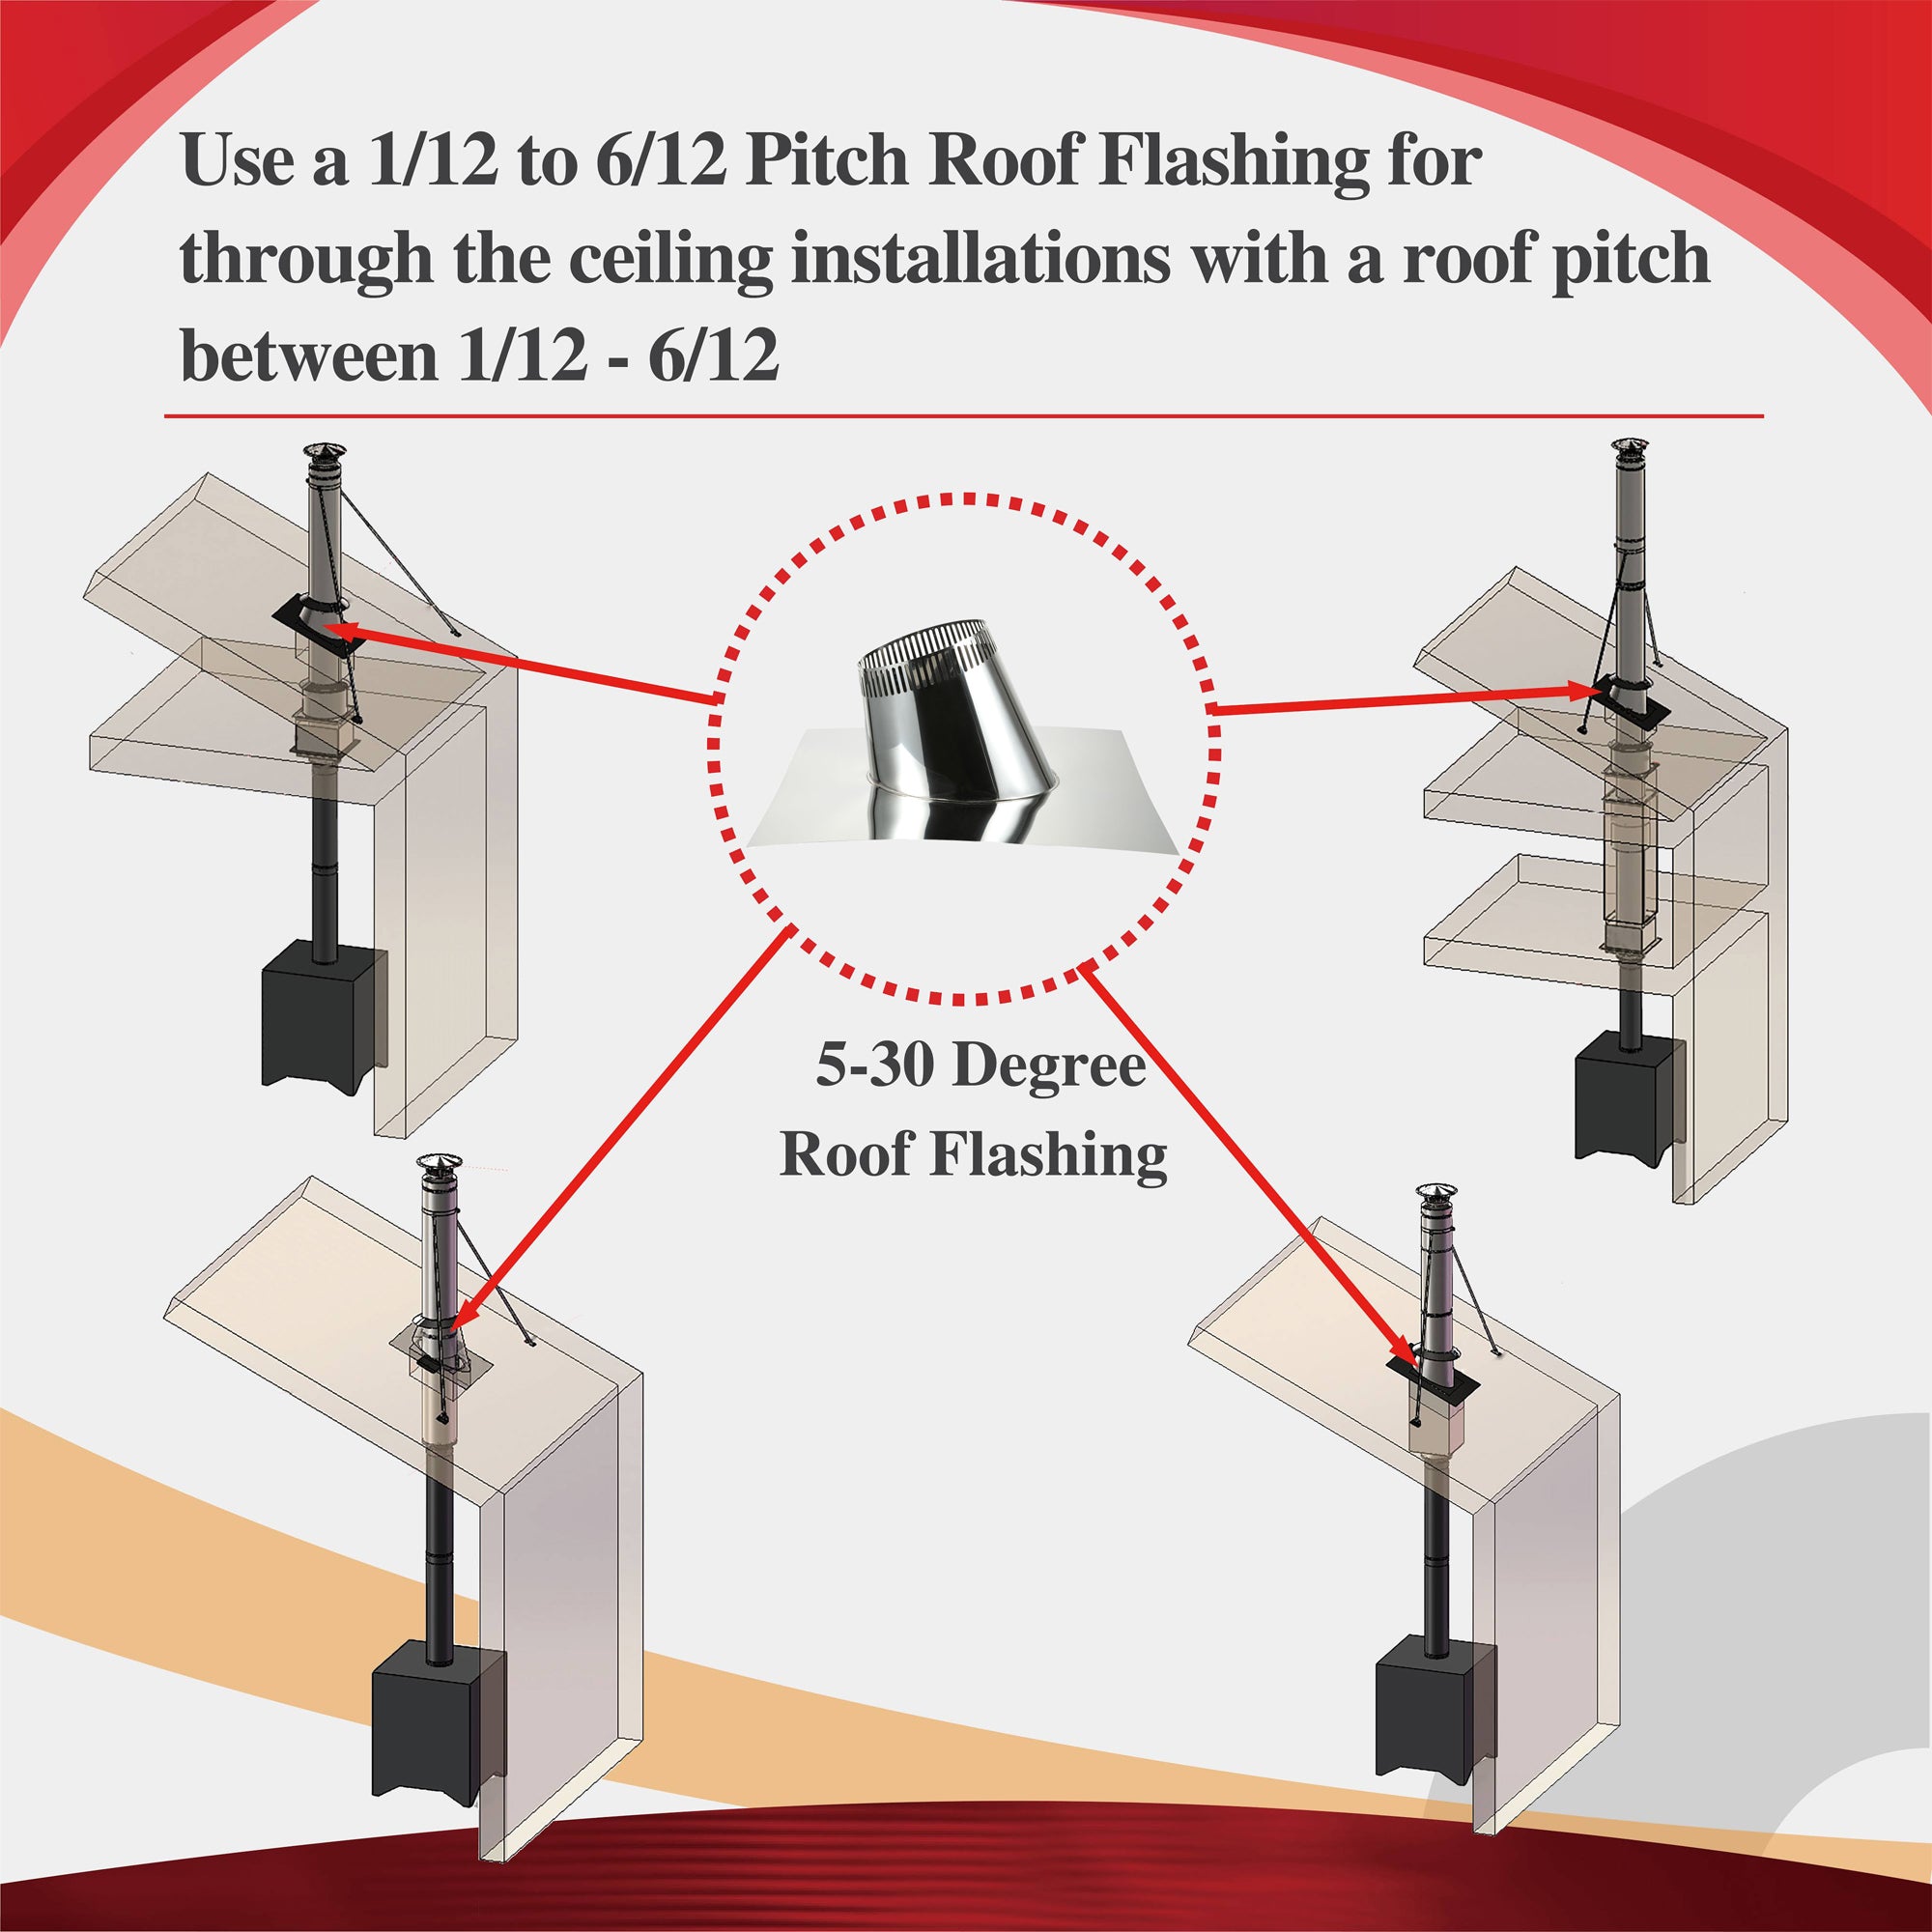 1/12 to 6/12 Pitch Roof Flashing for 6 Inner Diameter Chimney Pipe –  AllFuel HST